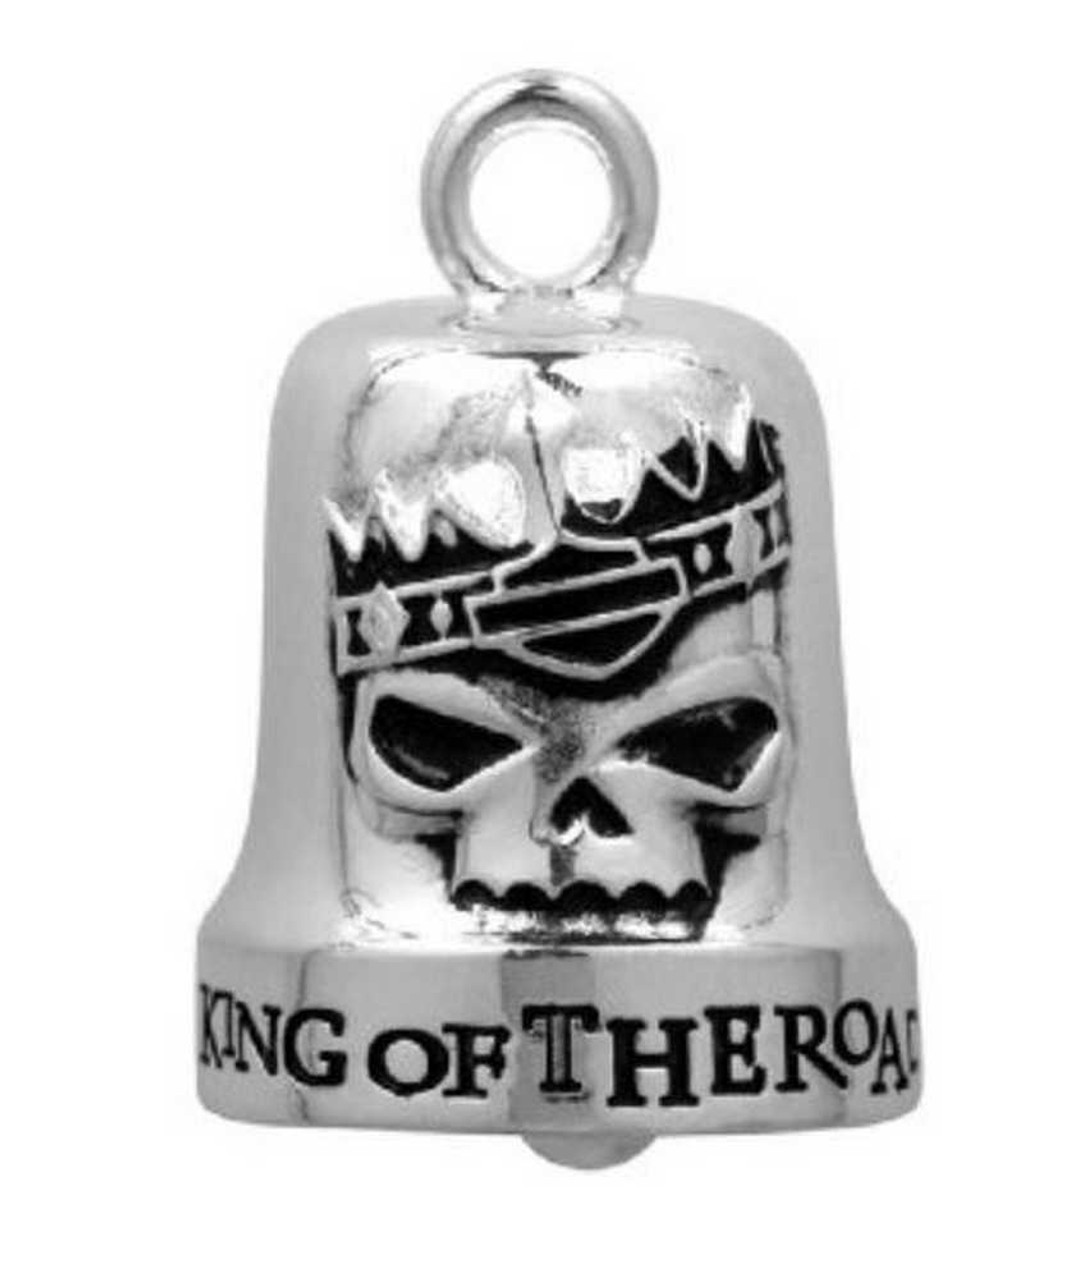 HARLEY DAVIDSON KING OF THE ROAD RIDE BELL